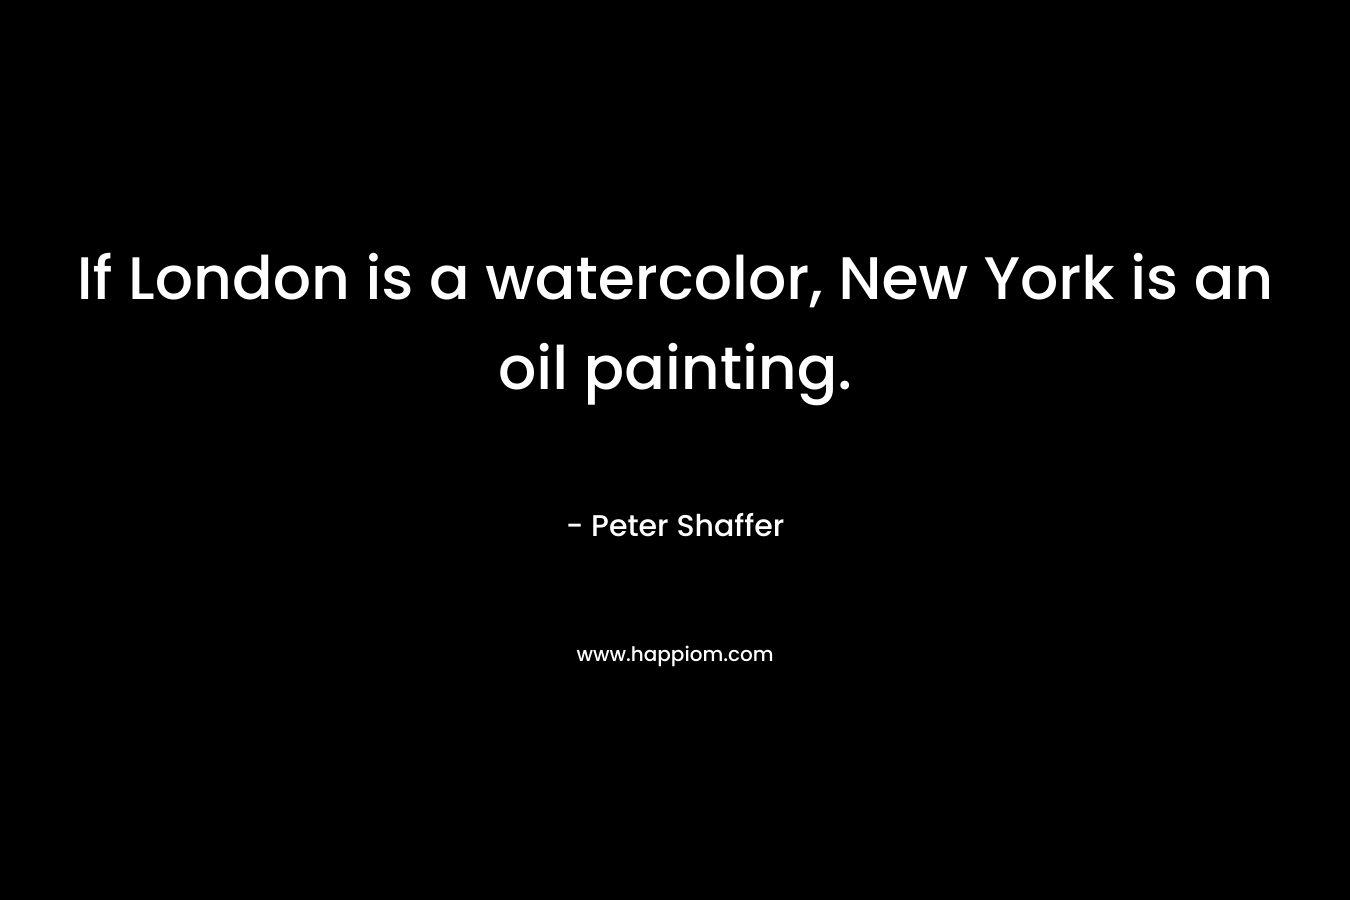 If London is a watercolor, New York is an oil painting. – Peter Shaffer